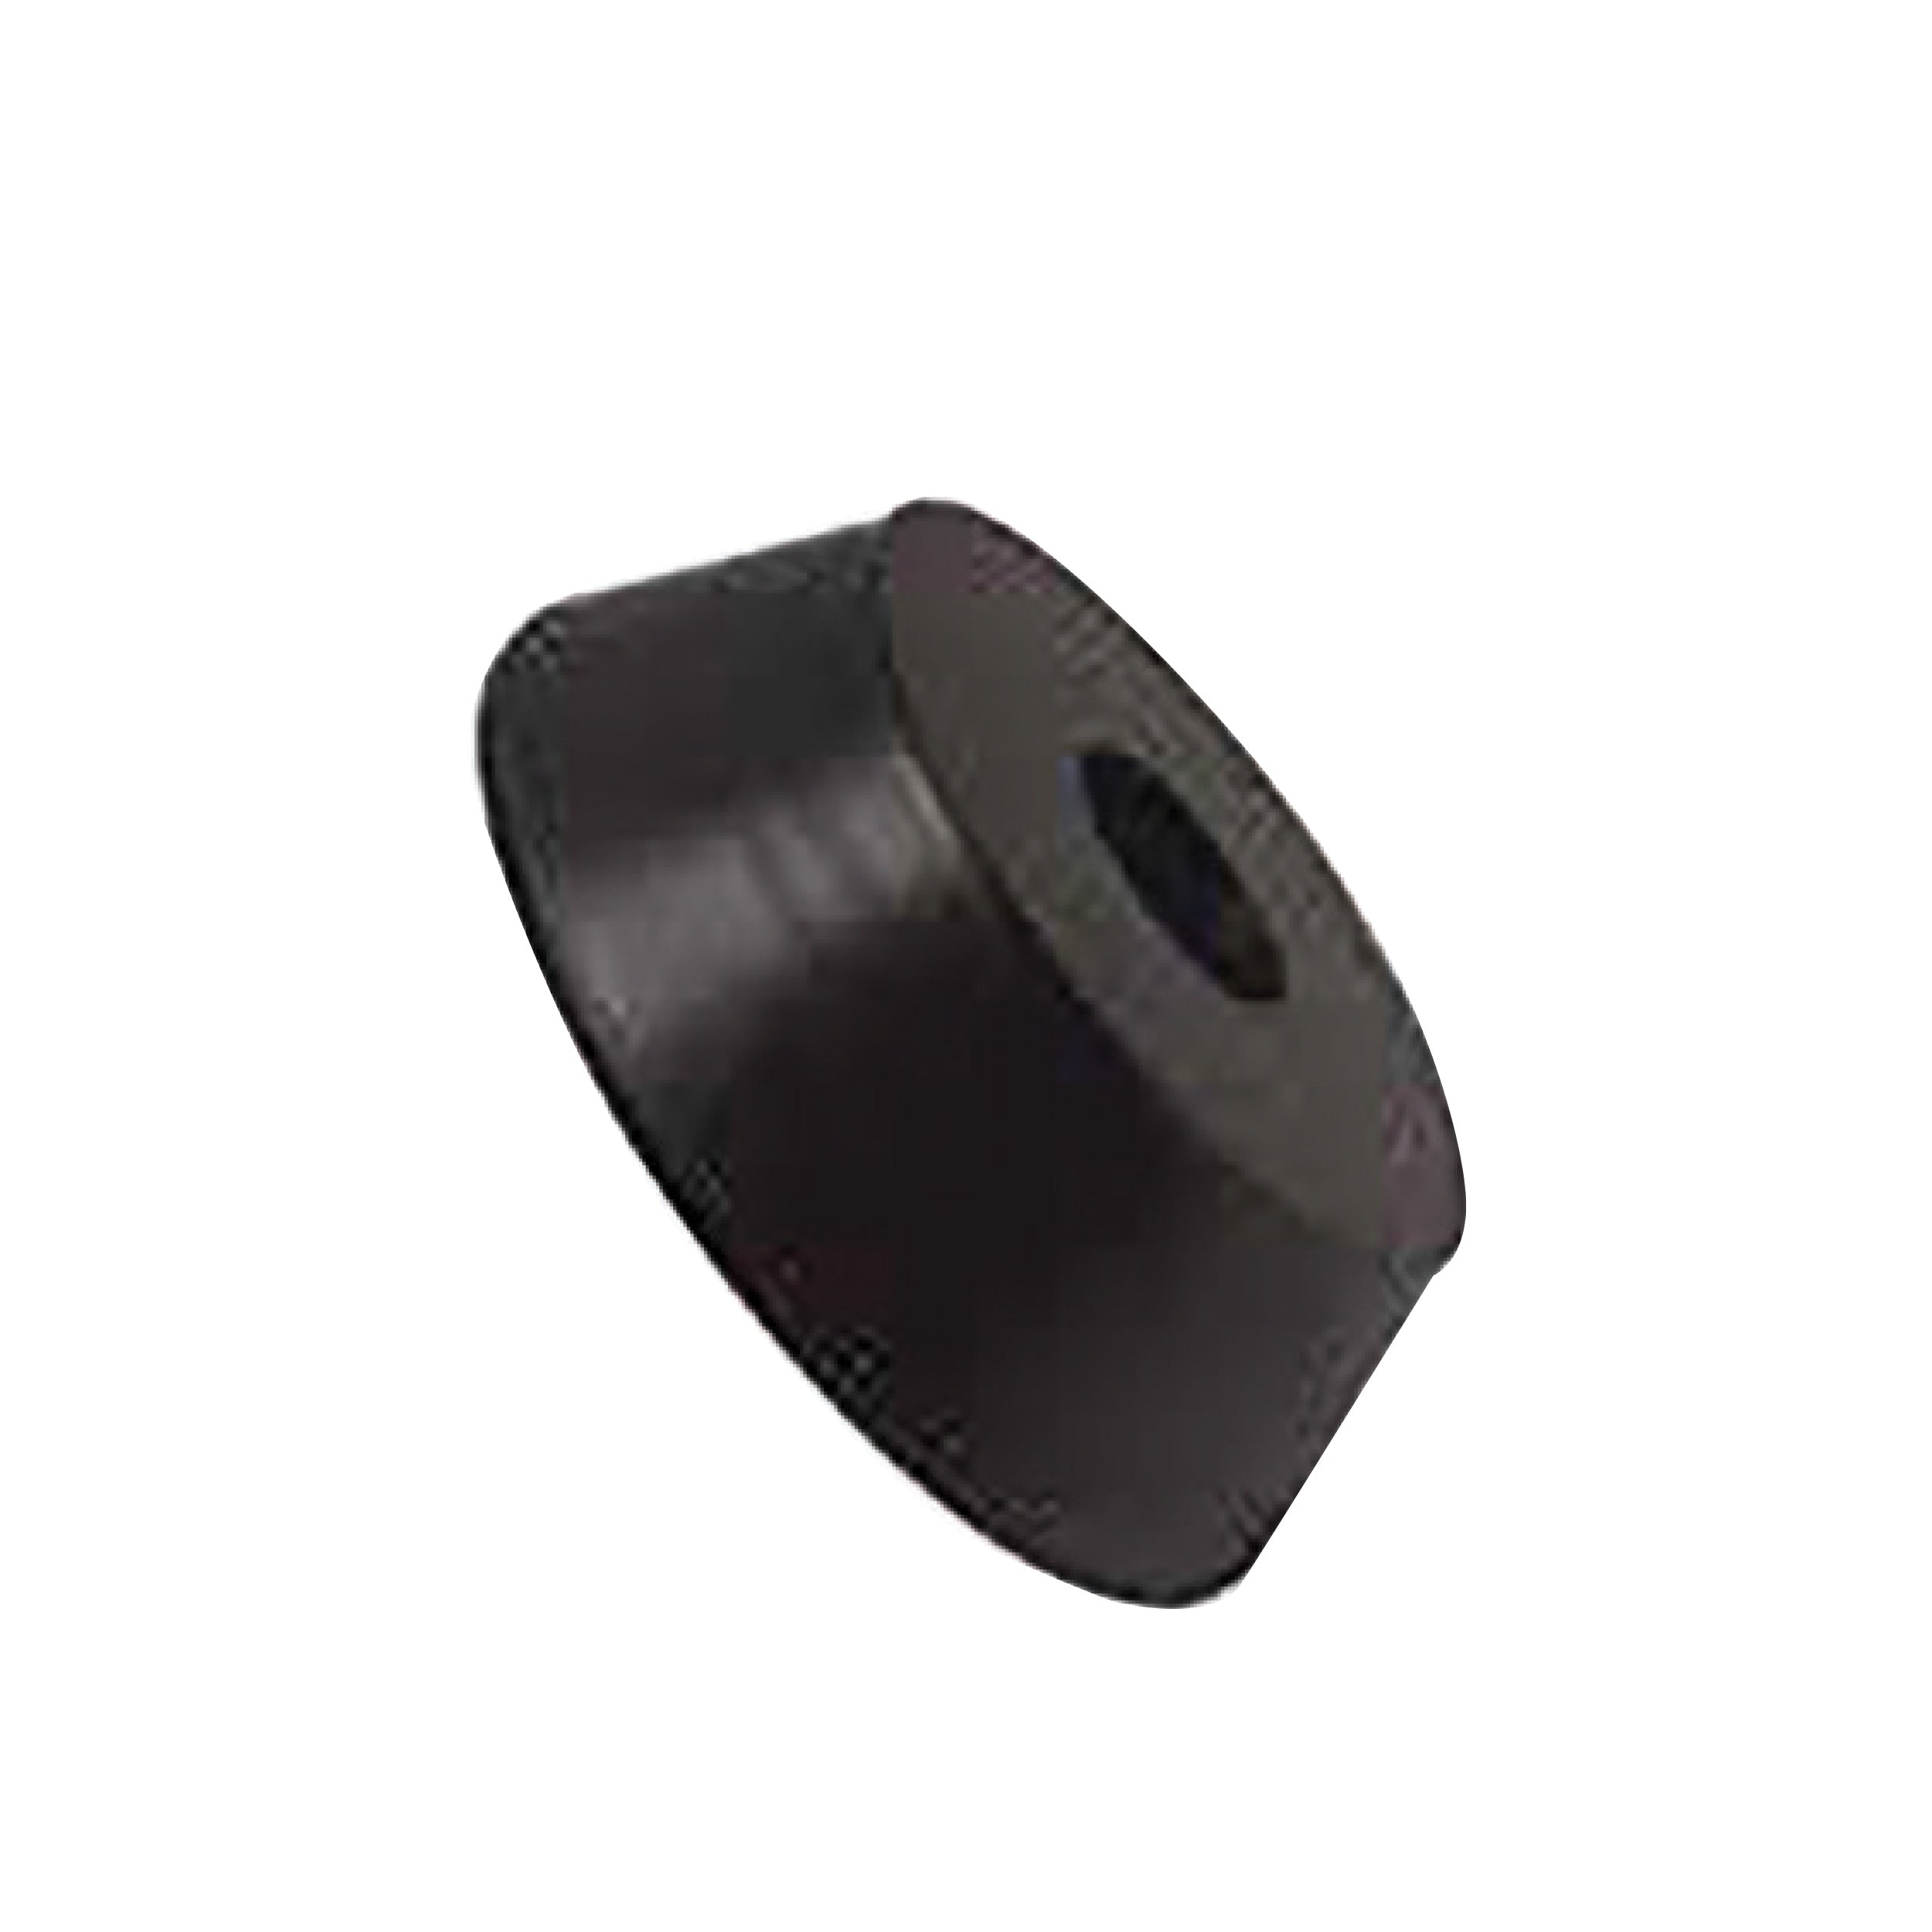 VENOM P DRIVE REPLACEMENT ROLLERS 3PK (931009)